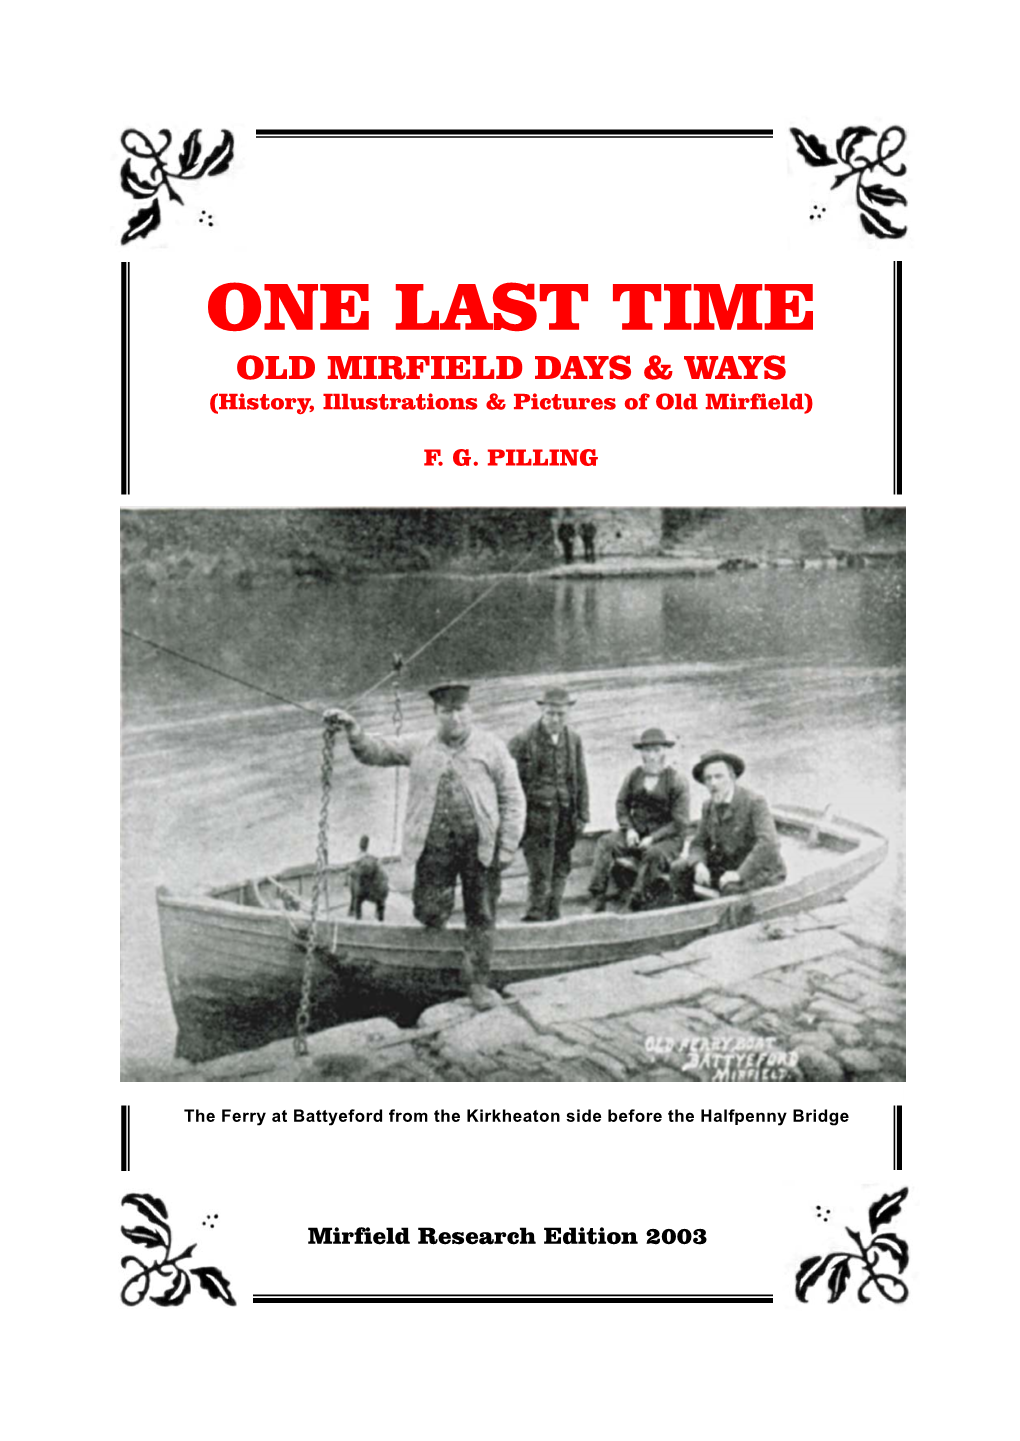 OLD MIRFIELD DAYS & WAYS (History, Illustrations & Pictures of Old Mirfield)